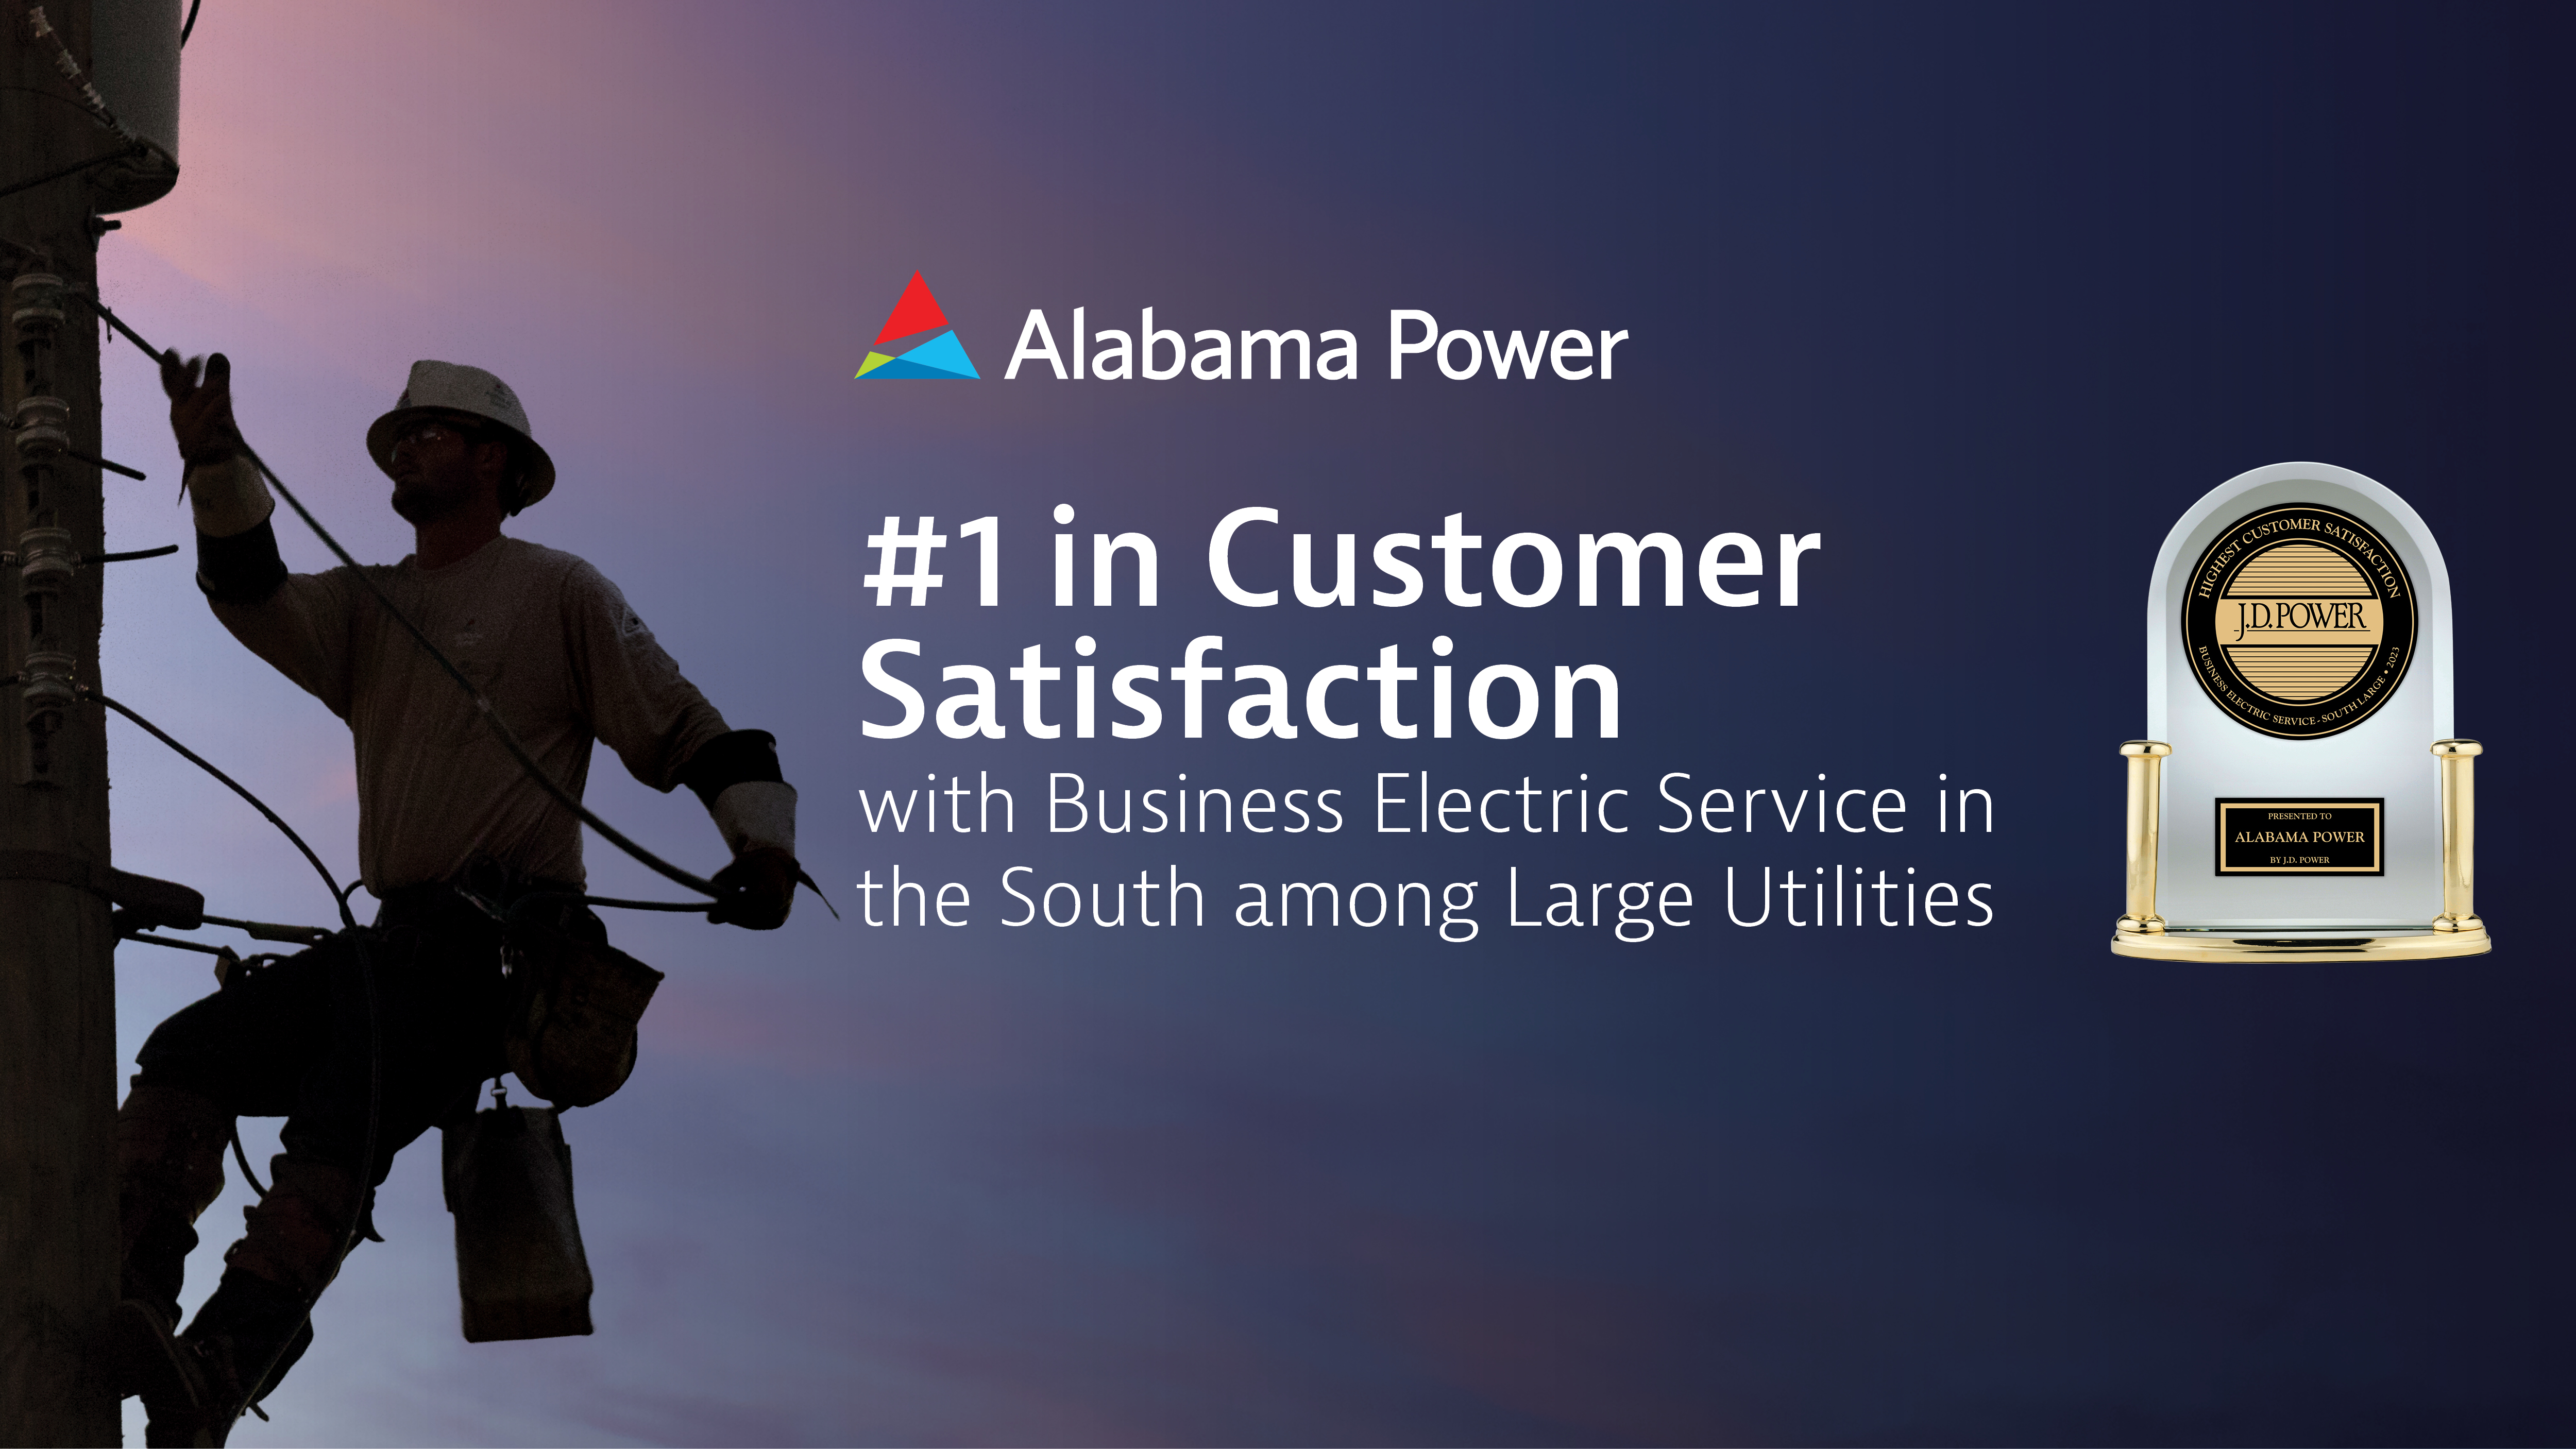 #1 in Customer Satisfaction with Business Electric Service in the South among Large Utilities